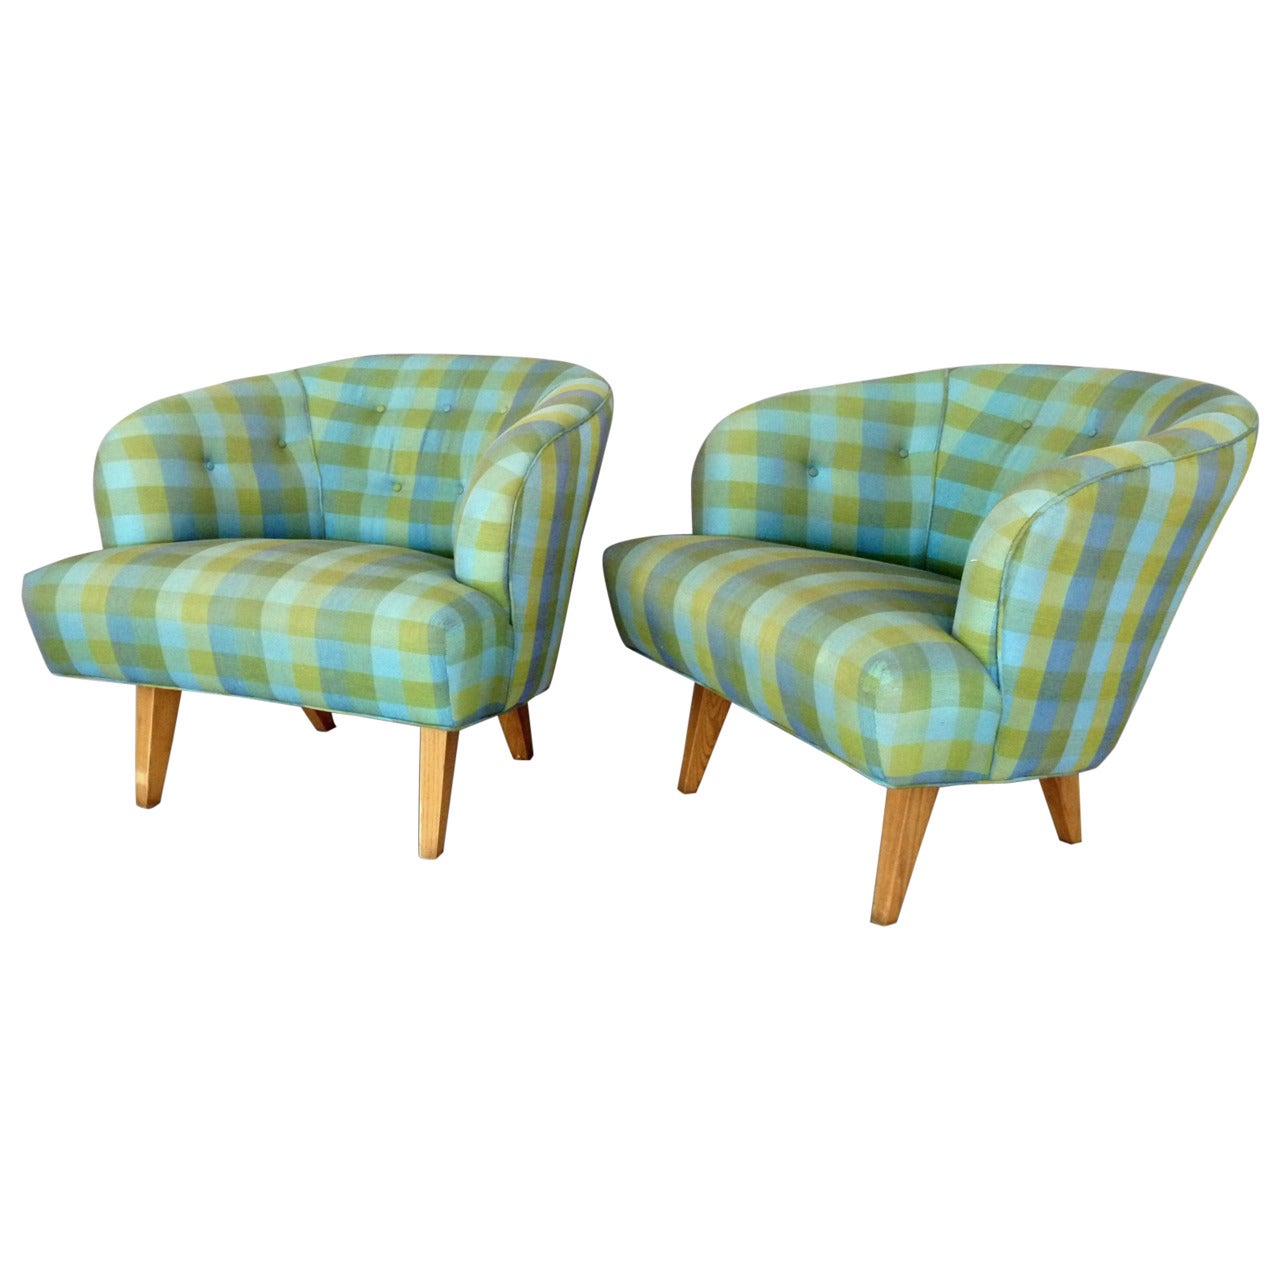 Pair of Modernist Barrel Back Club Lounge Chairs For Sale